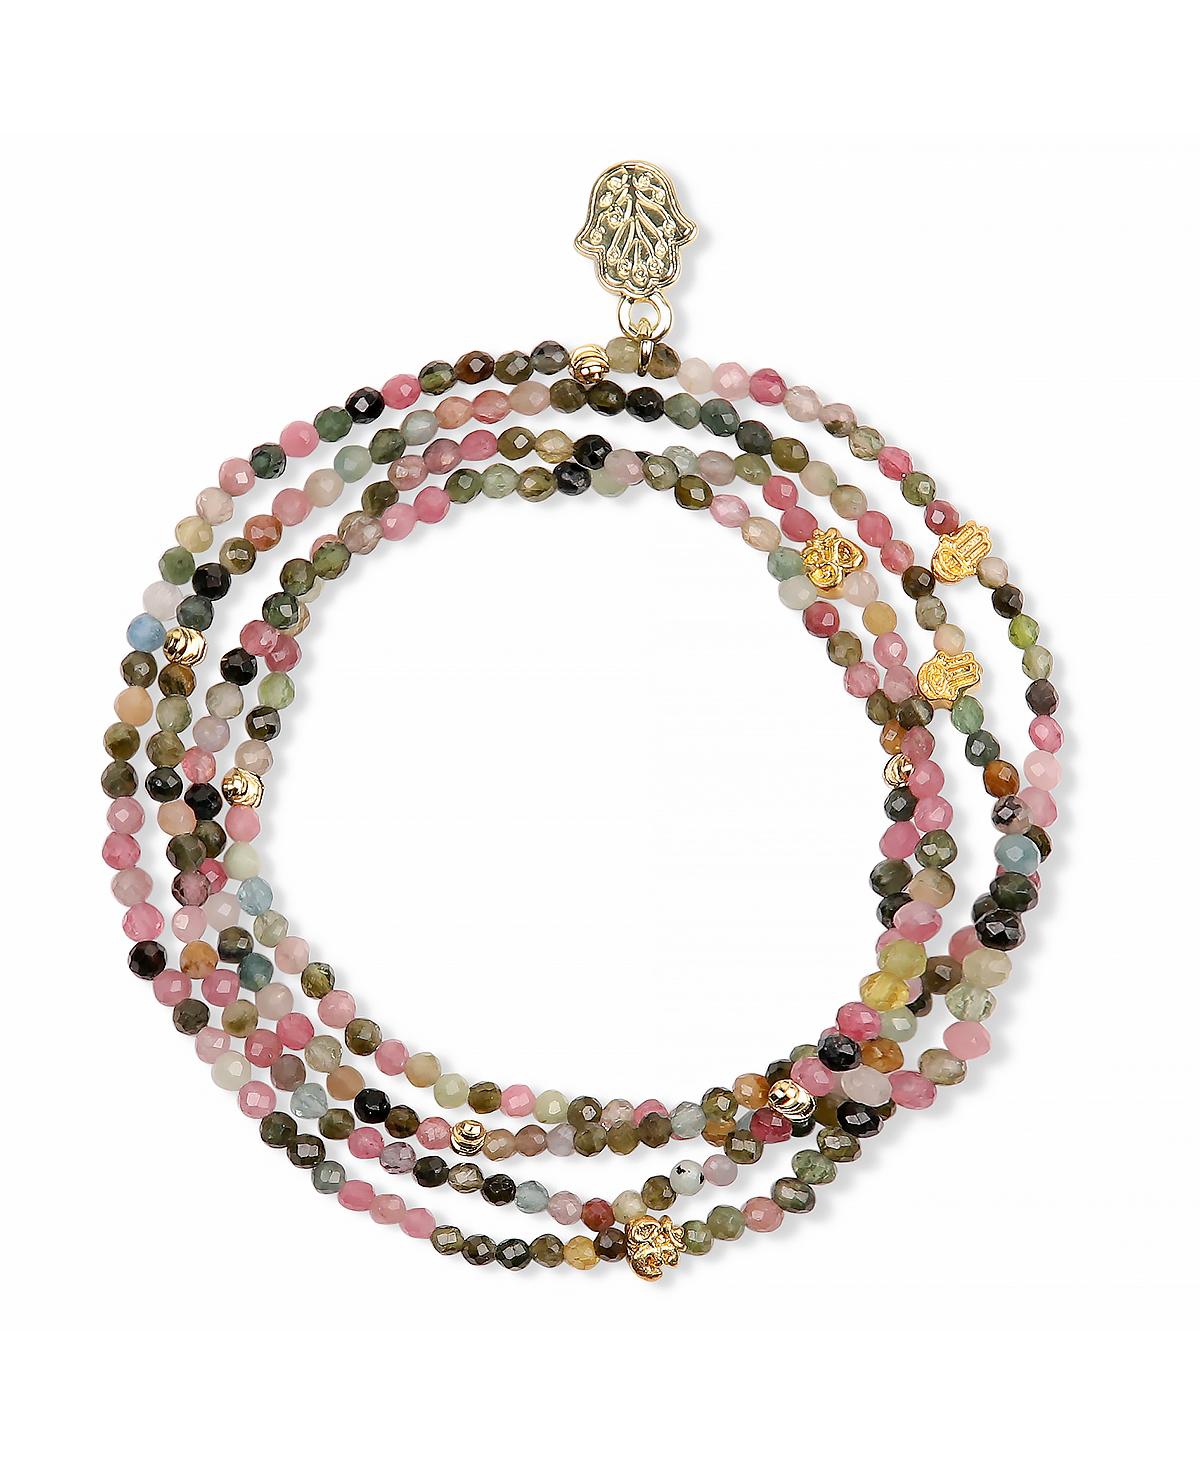 Peace and Protection - Tourmaline Wrap Bracelet - Pink/grey/yellow/green/gold